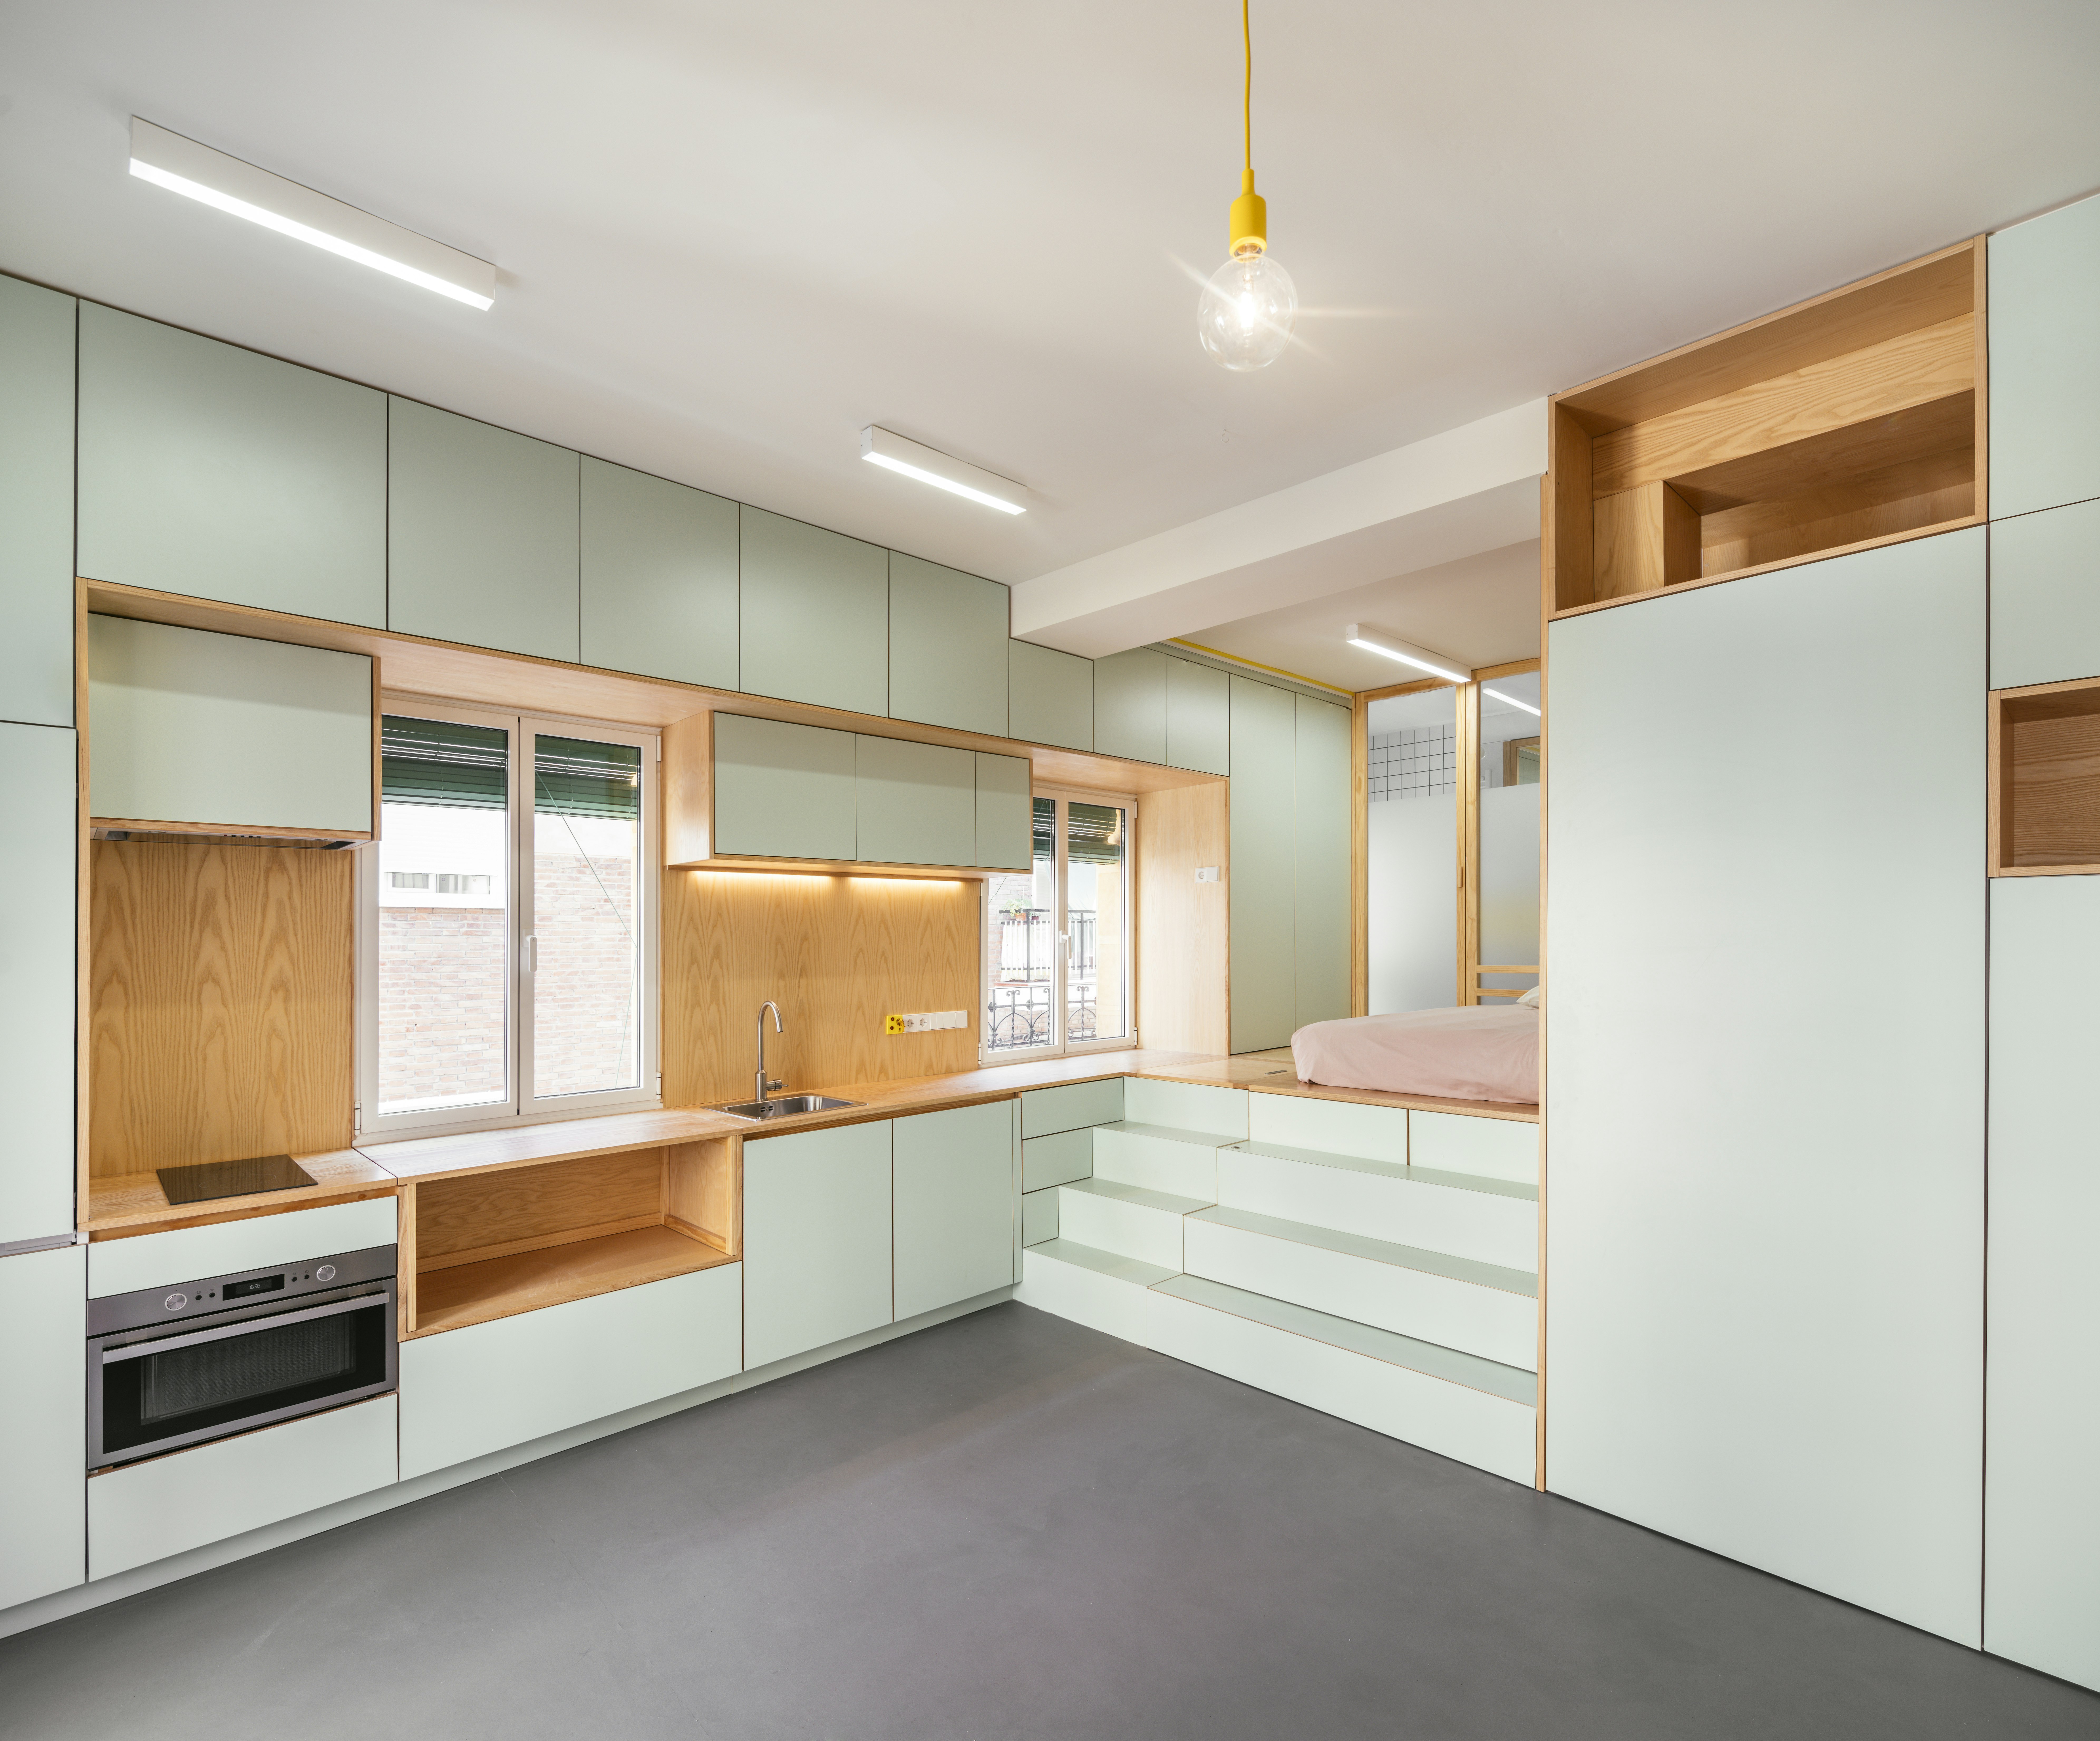 Mini kitchen fits studio or in-law unit / In tiny spaces